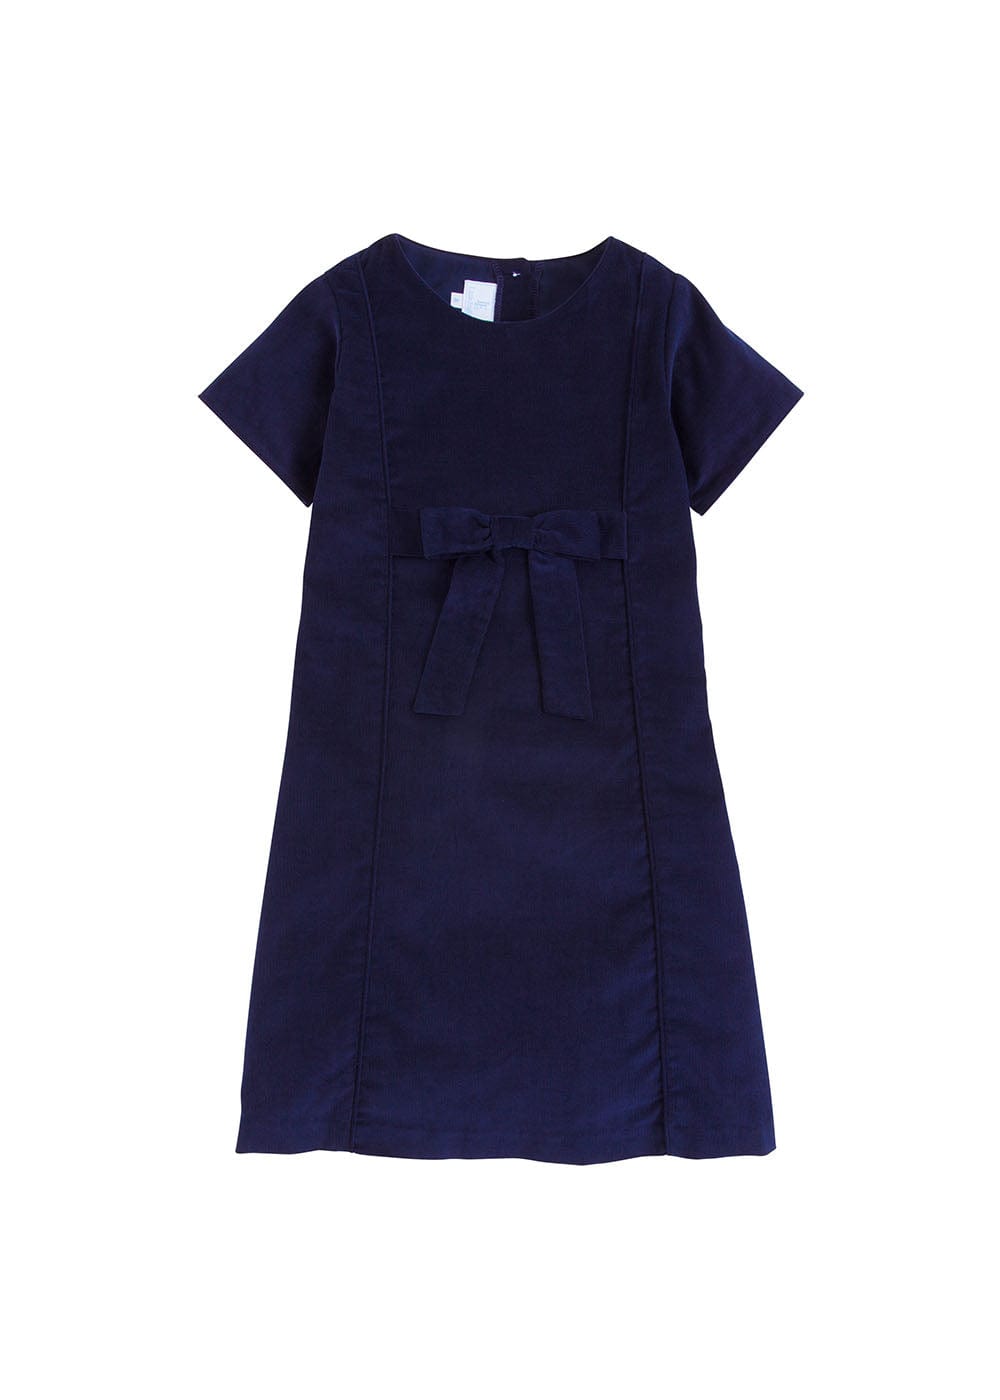 classic childrens clothing girls a line dress in navy with bow and piping detail